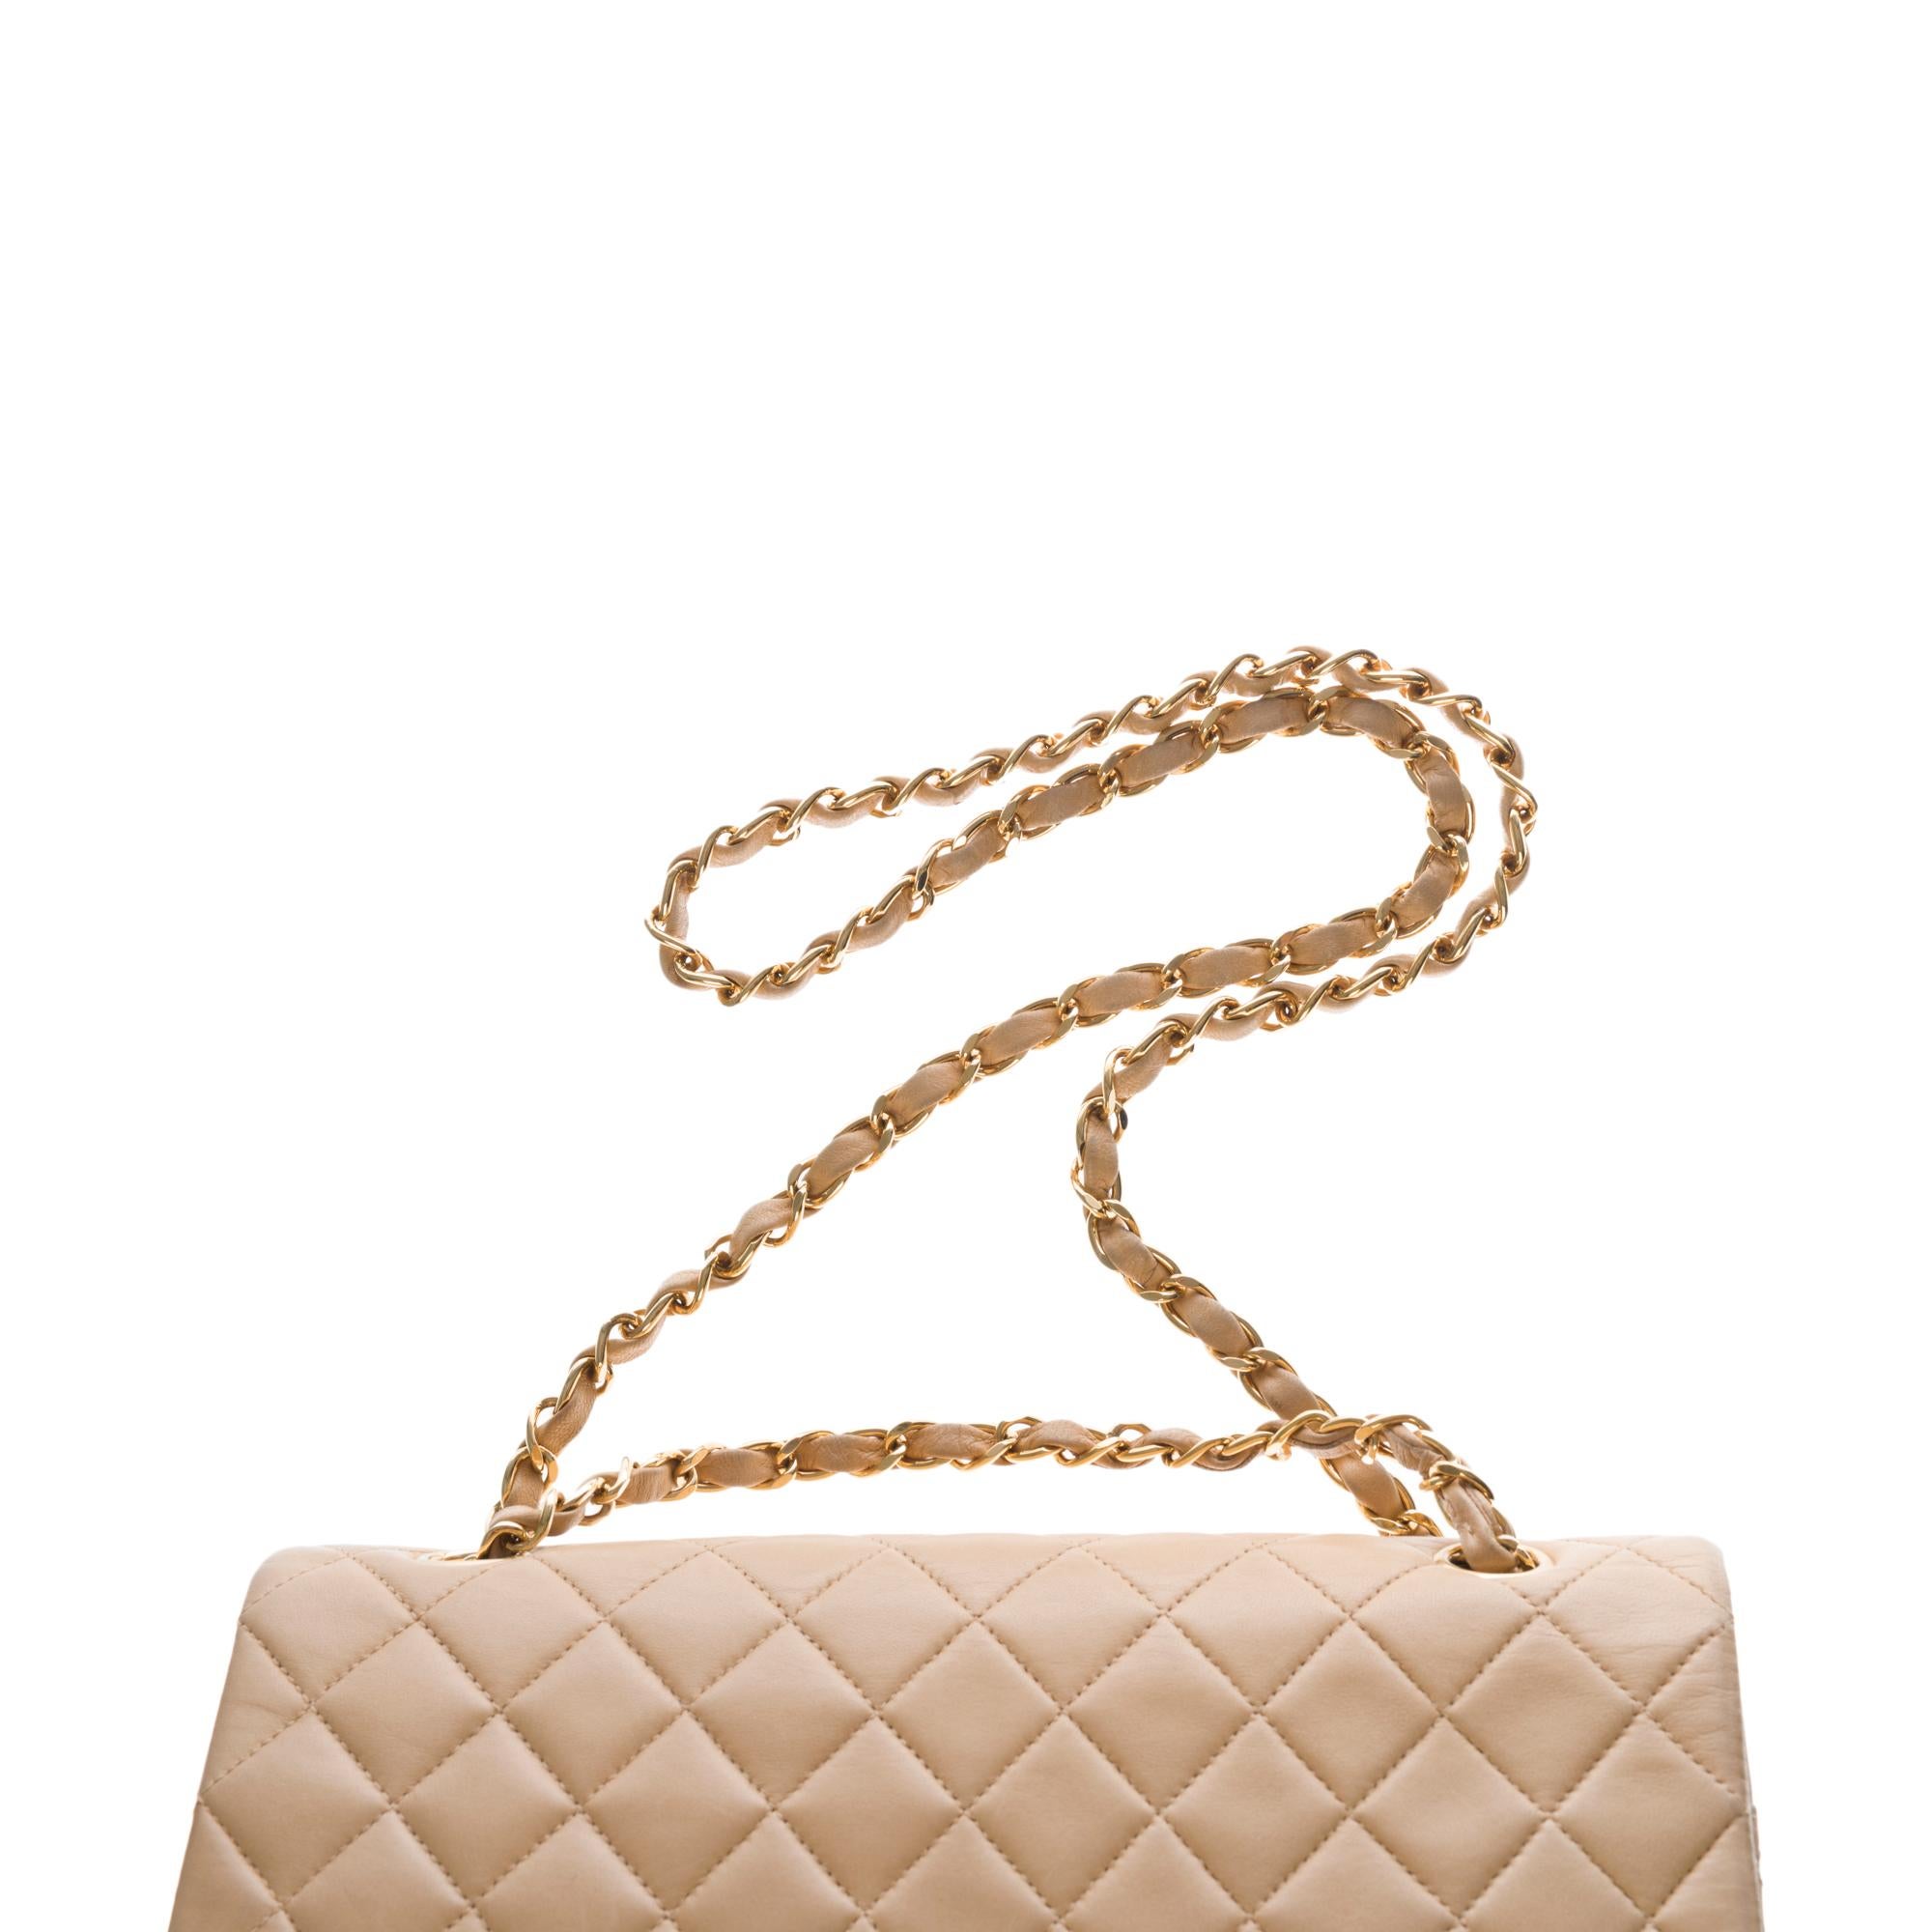 Chanel Timeless double flap Medium Shoulder bag in beige quilted leather, GHW 3